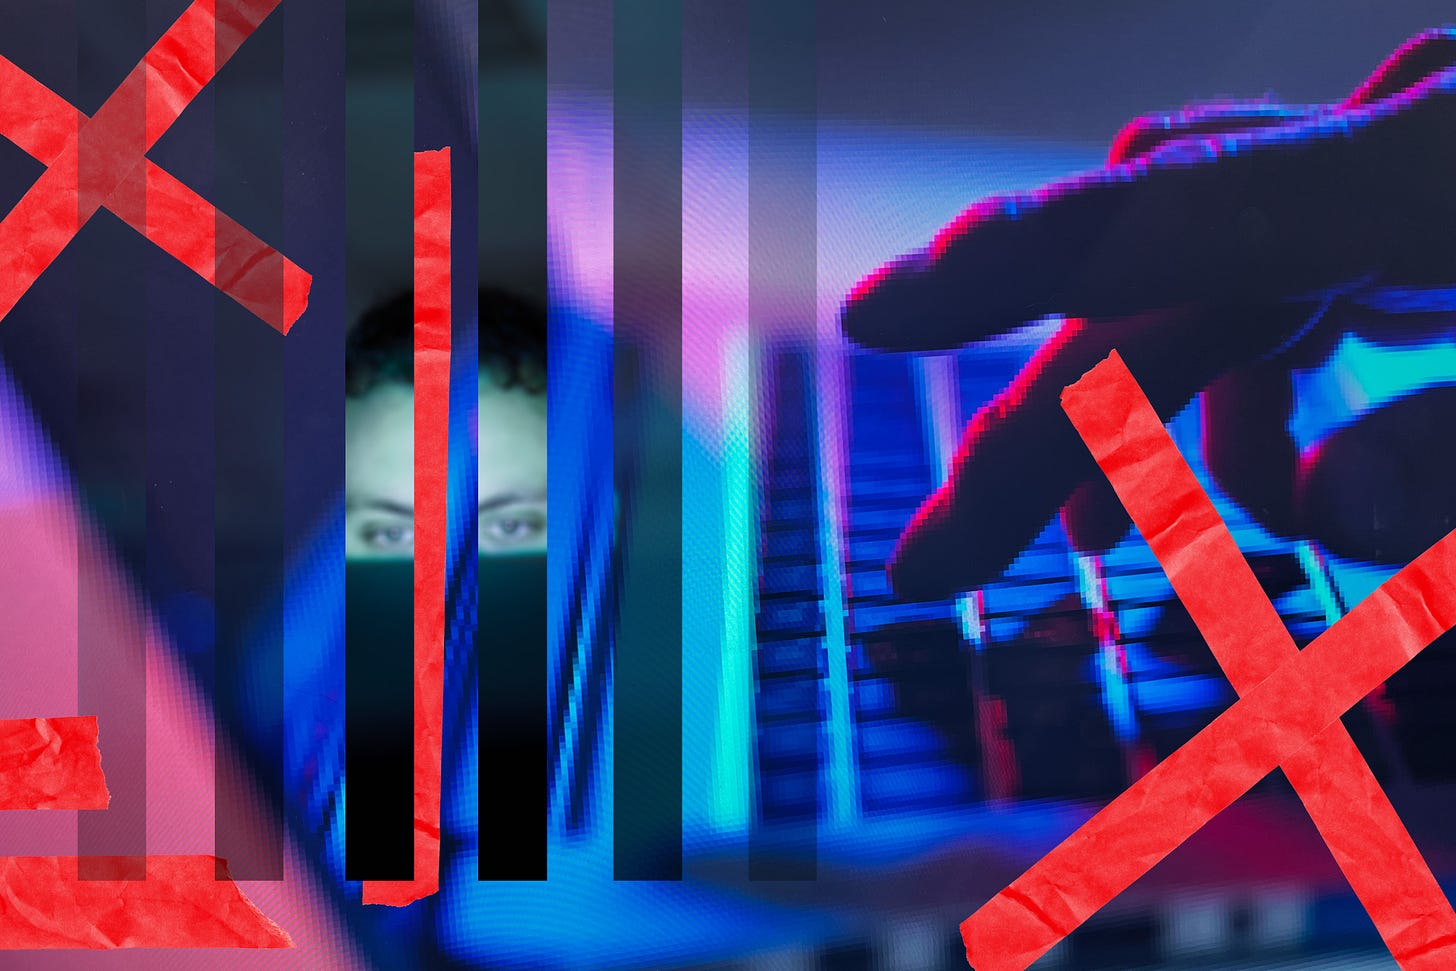 Photo illustration of a person typing on a keyboard surrounded by red Xs.(Kristen Radtke / The Verge)